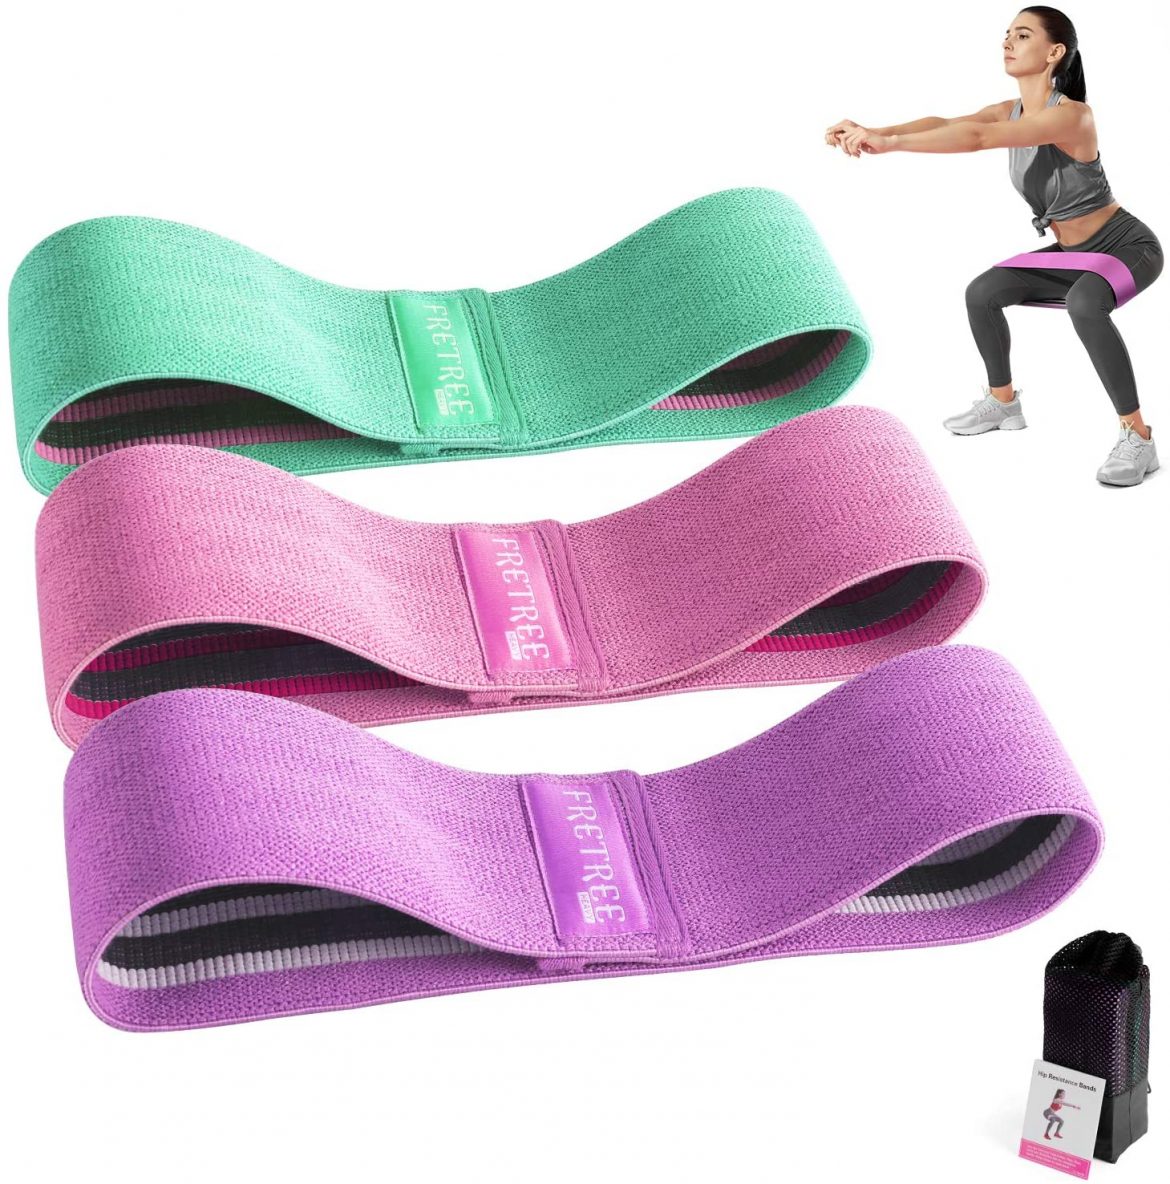 Top 10 Best Exercise Resistance Loop Bands in 2021 Complete Reviews